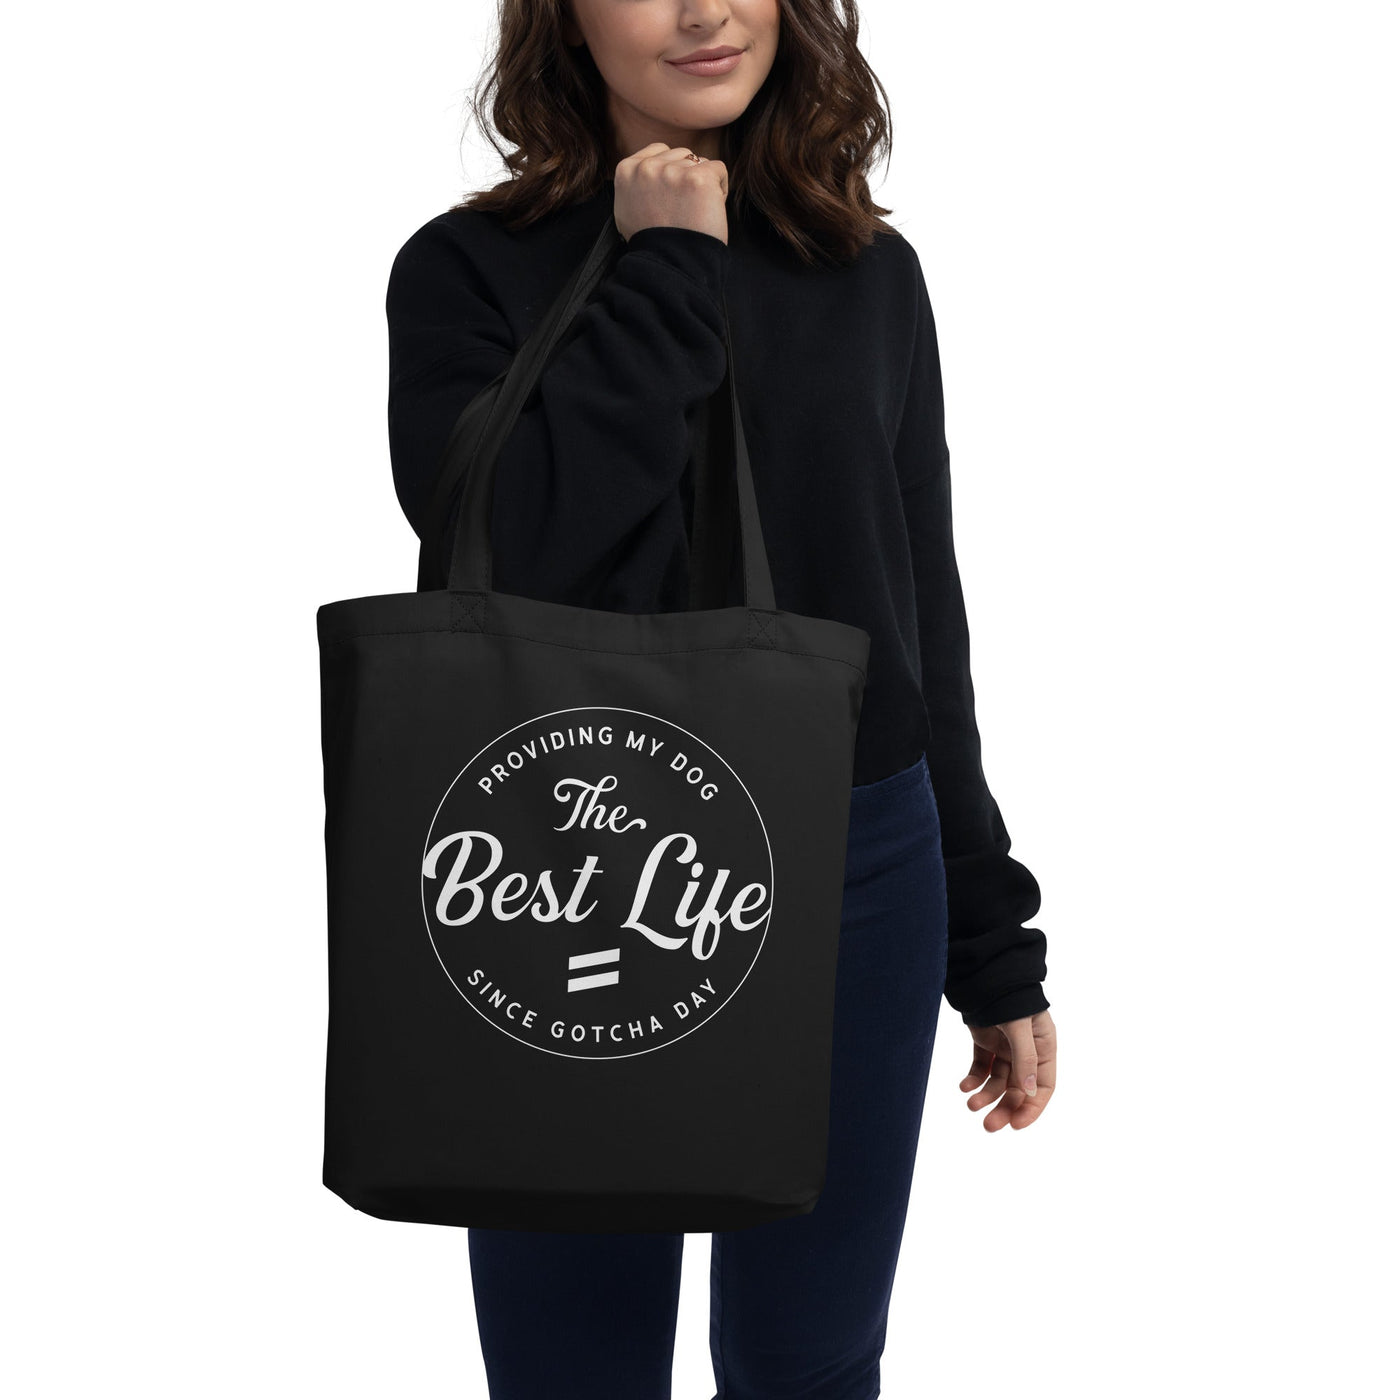 Gotcha Day - Eco Tote Bag Best Life Leashes | The Symbol For Rescue Dogs 